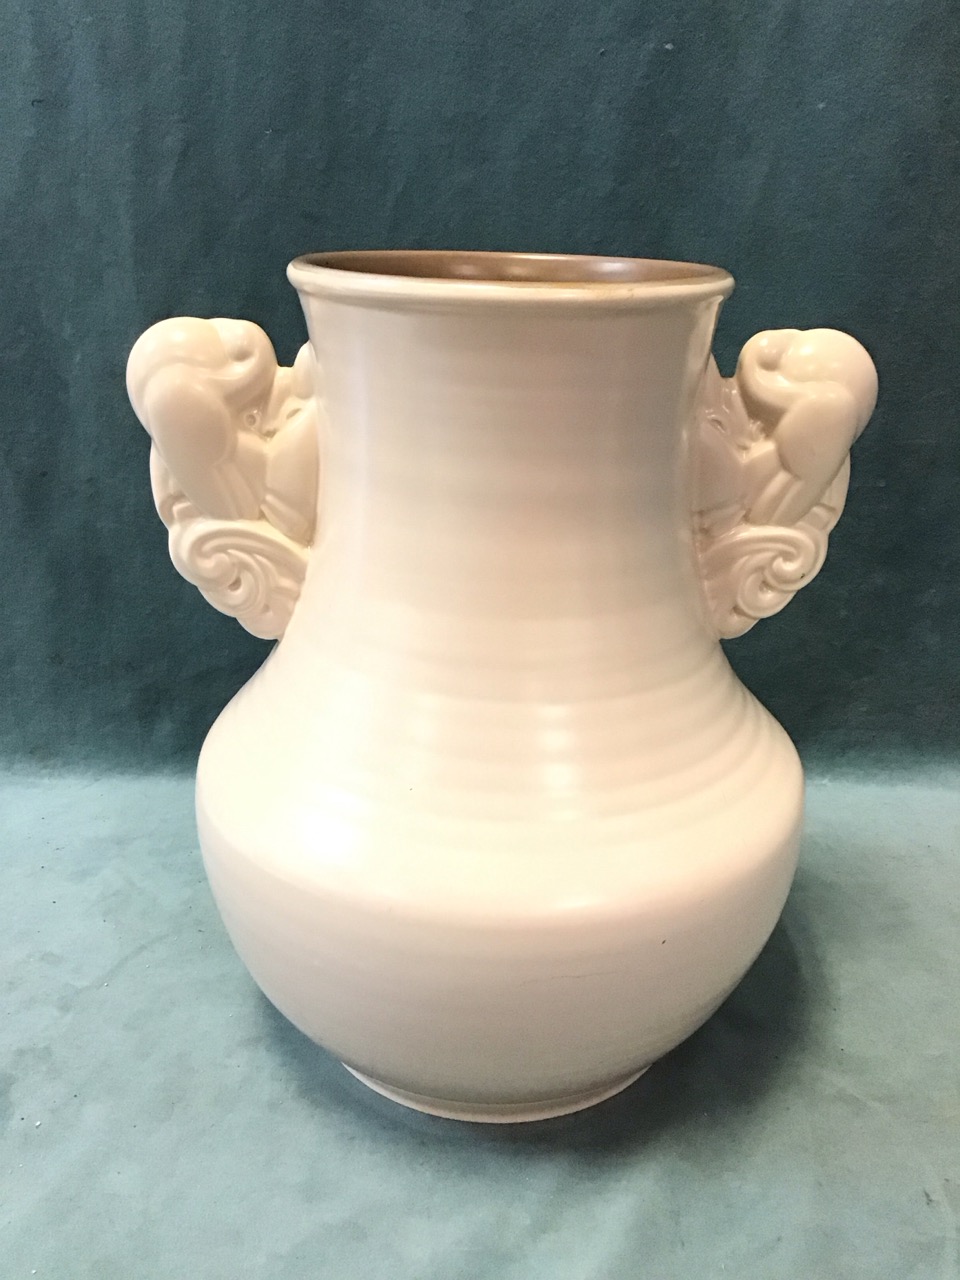 A large Poole Pottery art deco vase with hemispherical body and flared neck having applied moulded